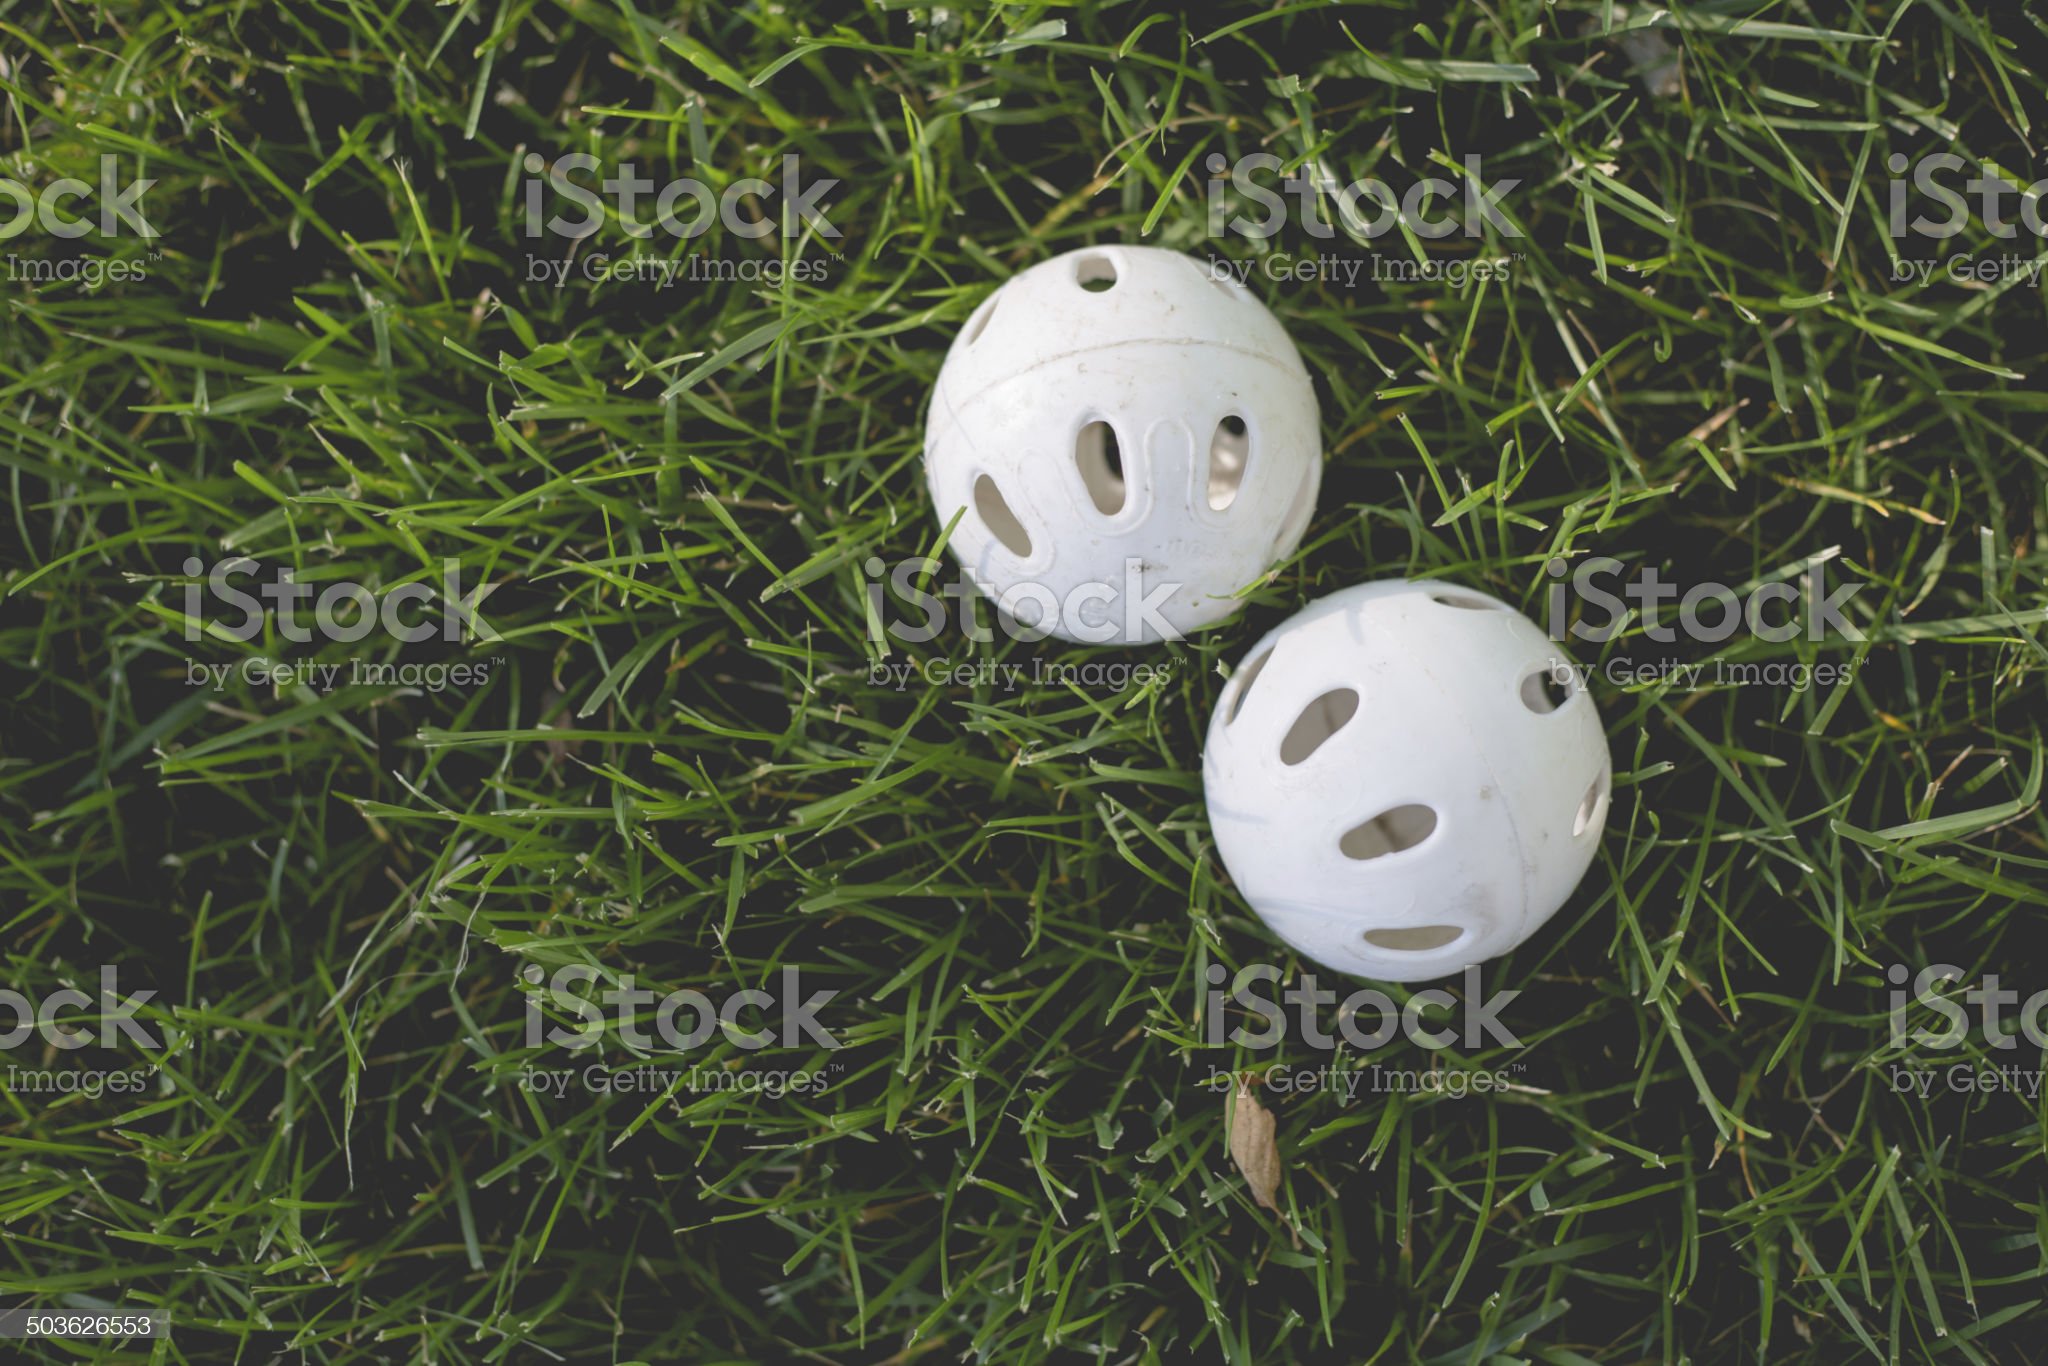 2 wiffle balls sit in the grass